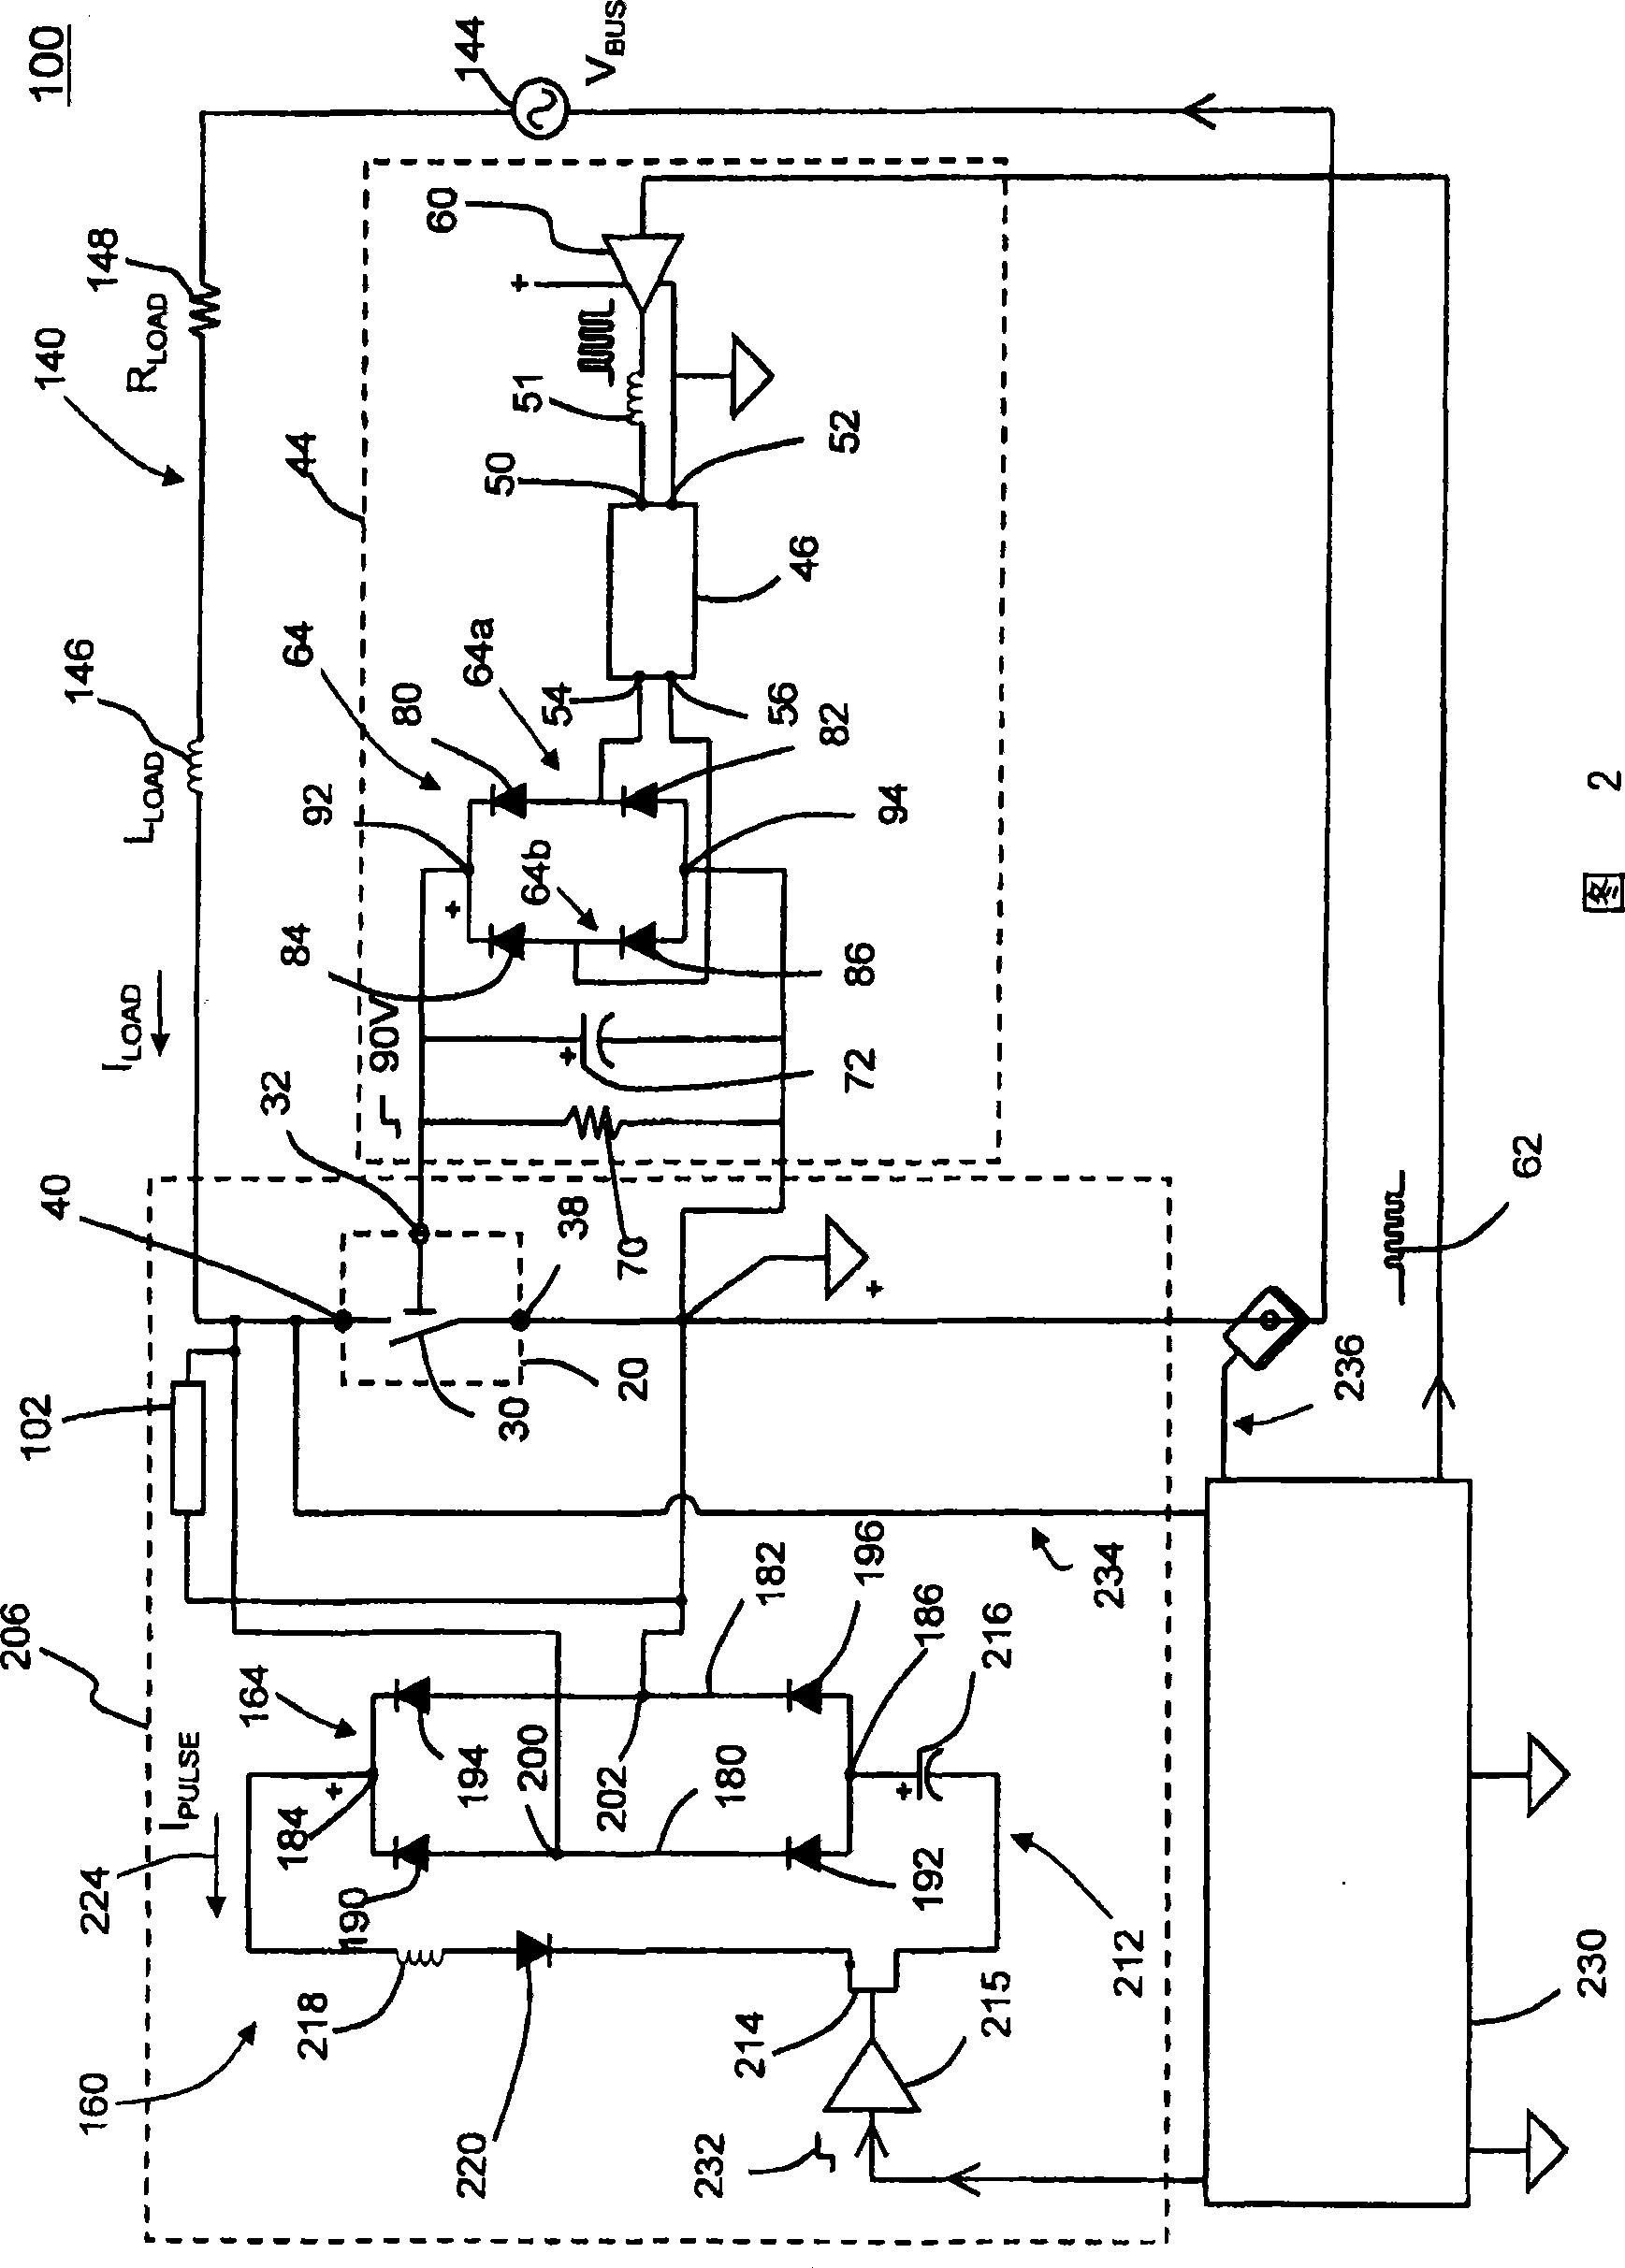 Circuit system with supply voltage for driving an electromechanical switch